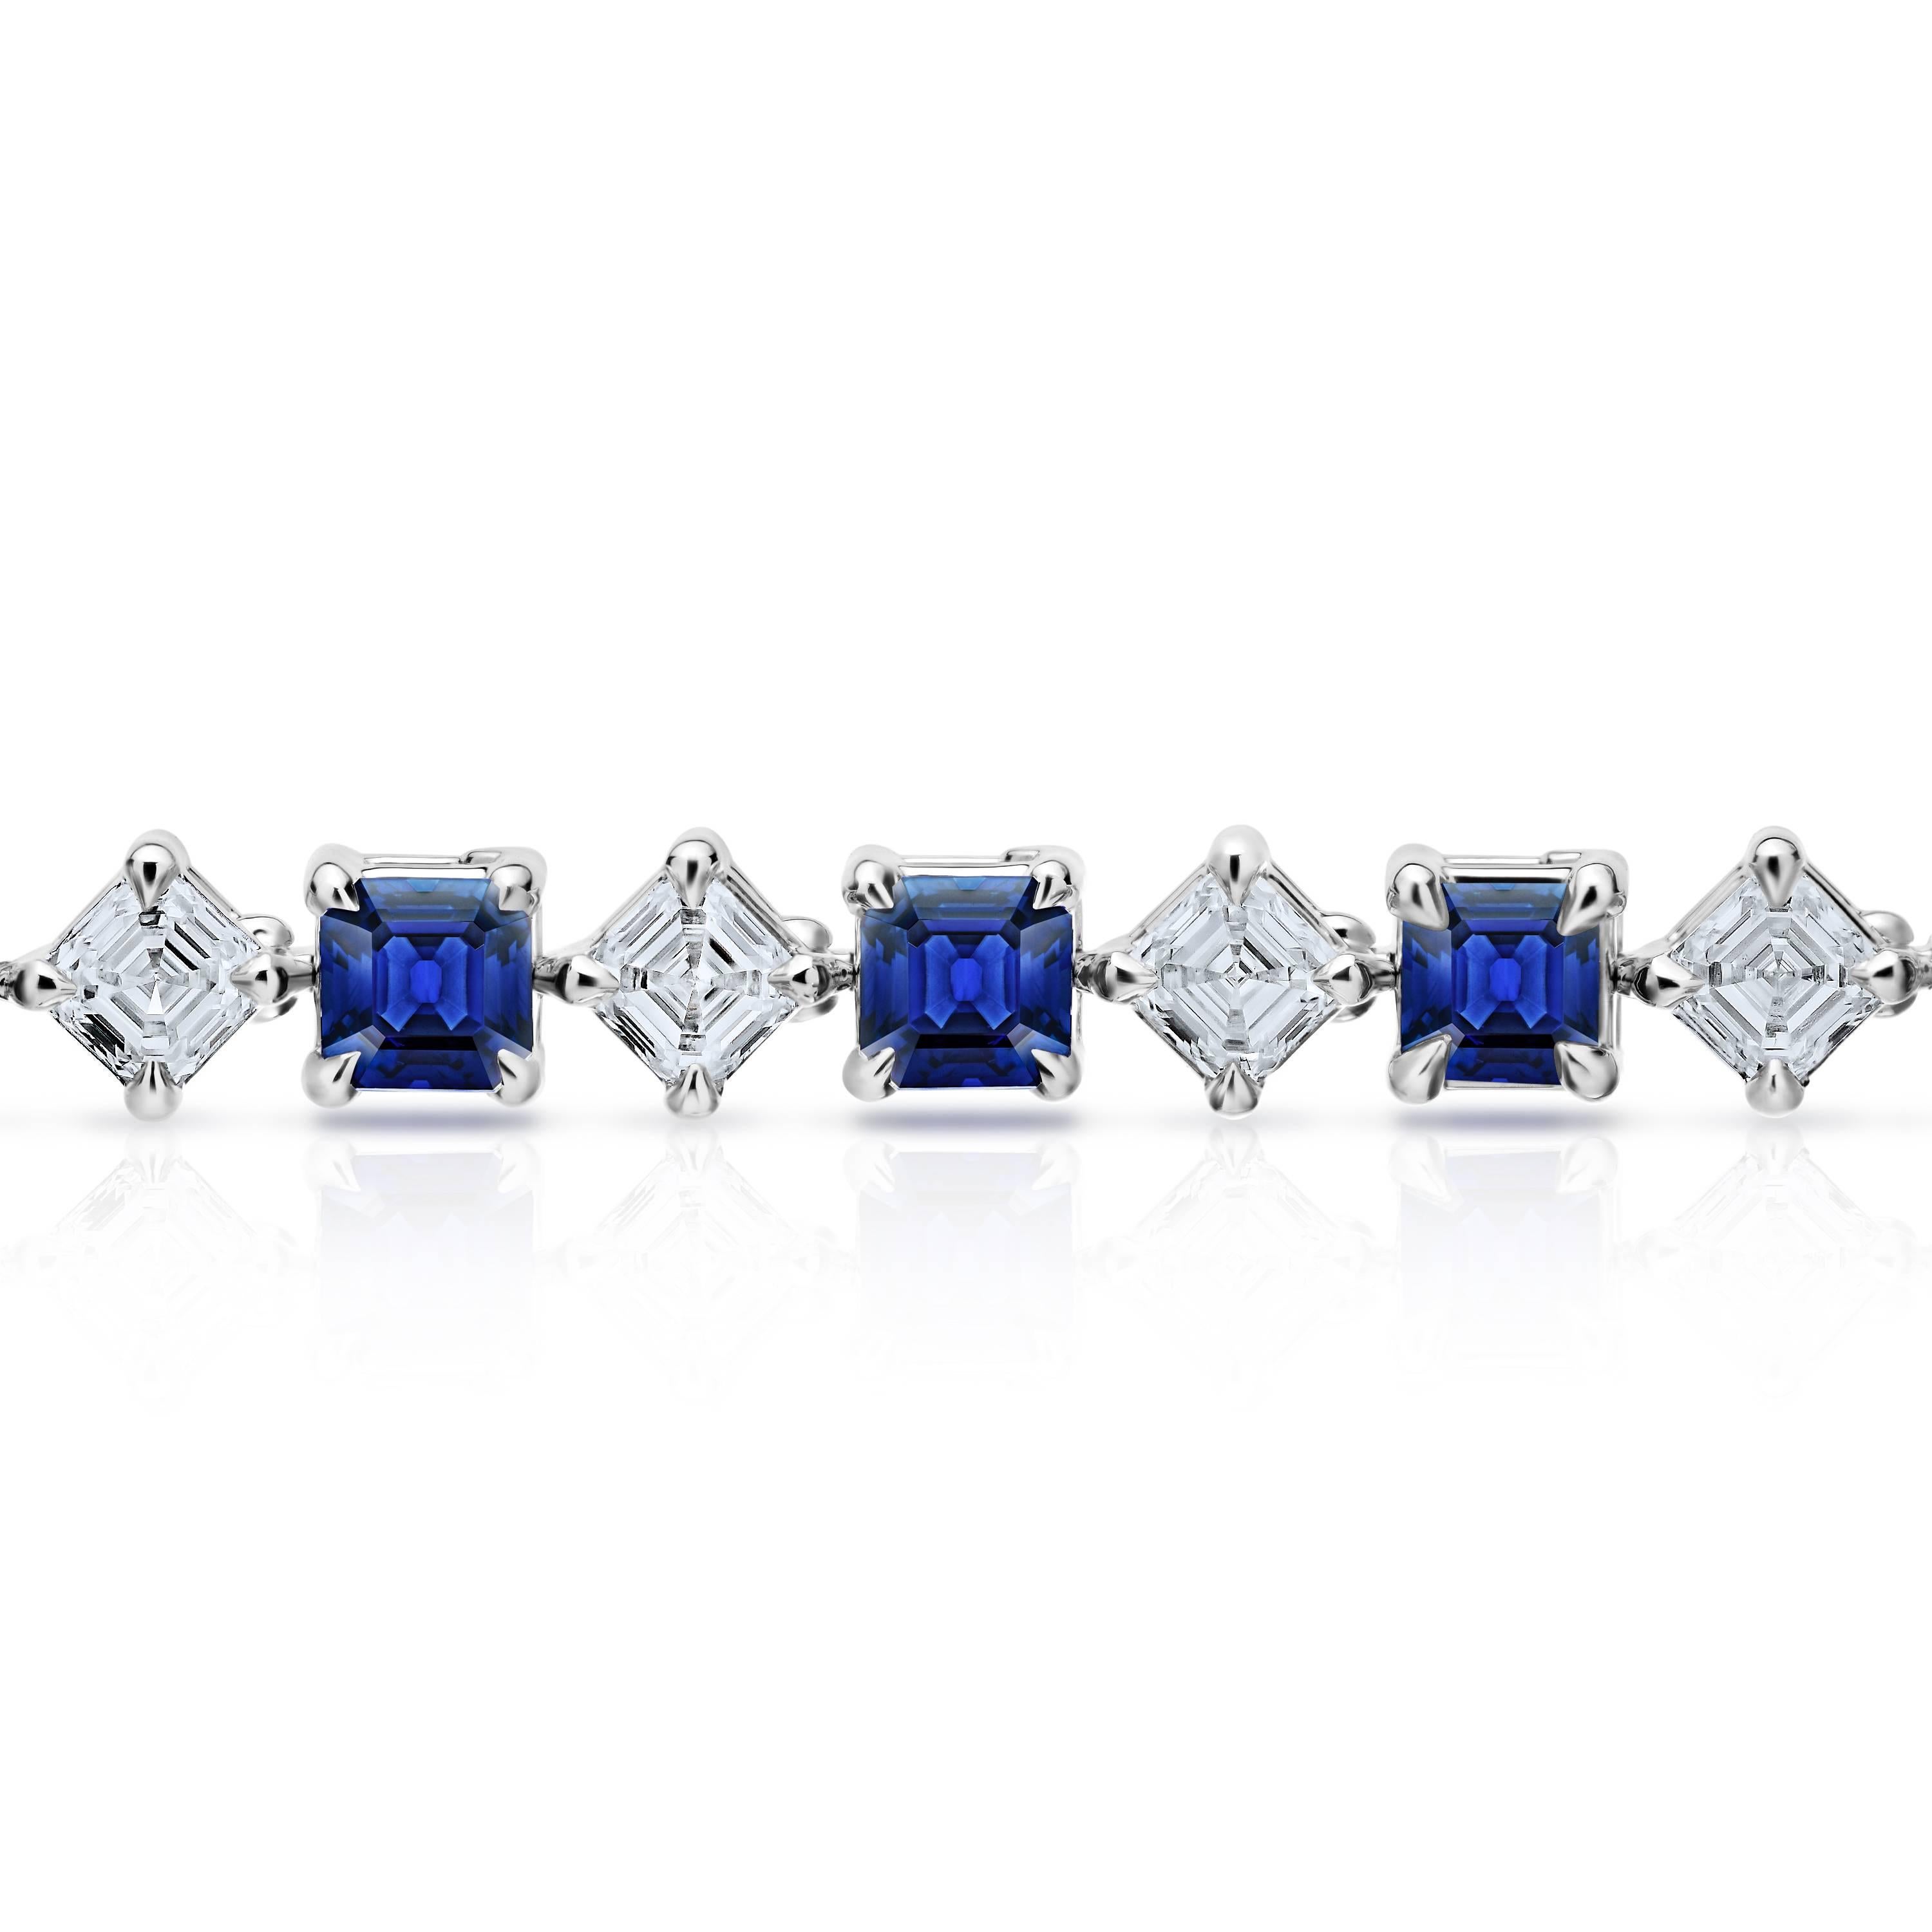 Fifteen Asscher Cut Blue Sapphires weighing 8.36 carats and Fifteen Asscher cut diamonds  weighing 6.31 carats set in a custom platinum bracelet. All sapphires are extremely vibrant in color and are clean. Every diamond has its own GIA report